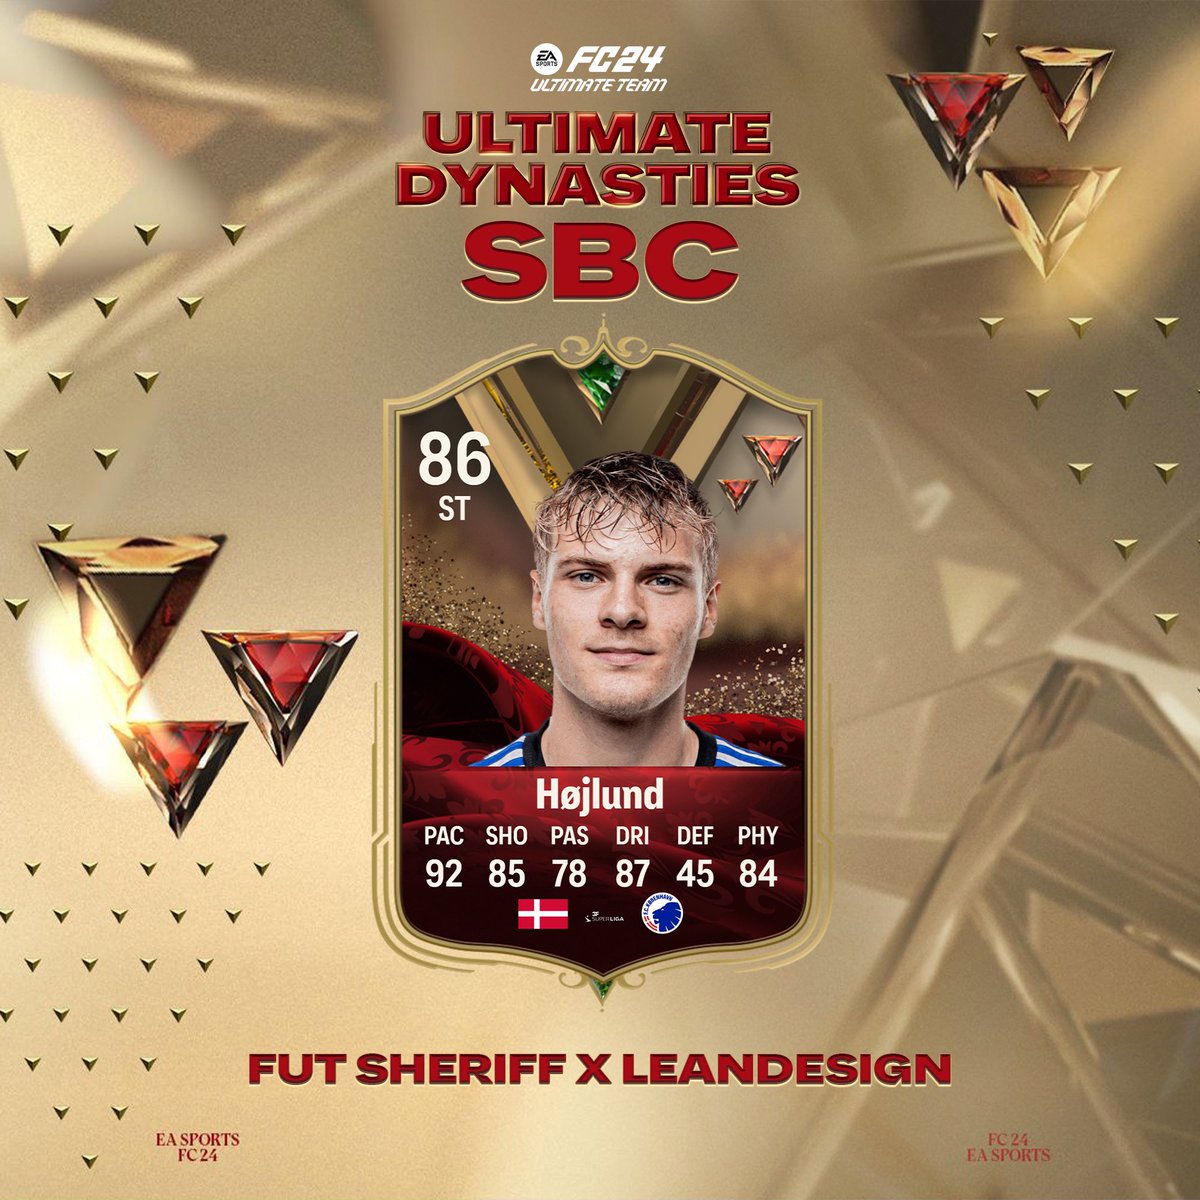 Fut Sheriff on X: 🚨Depay 🇳🇱 is coming as THUNDERSTRUCK SBC soon! Stats  are prediction! Make sure to follow @FutSheriff @Fut_scoreboard  @LeanDesign_ ! #fc24  / X